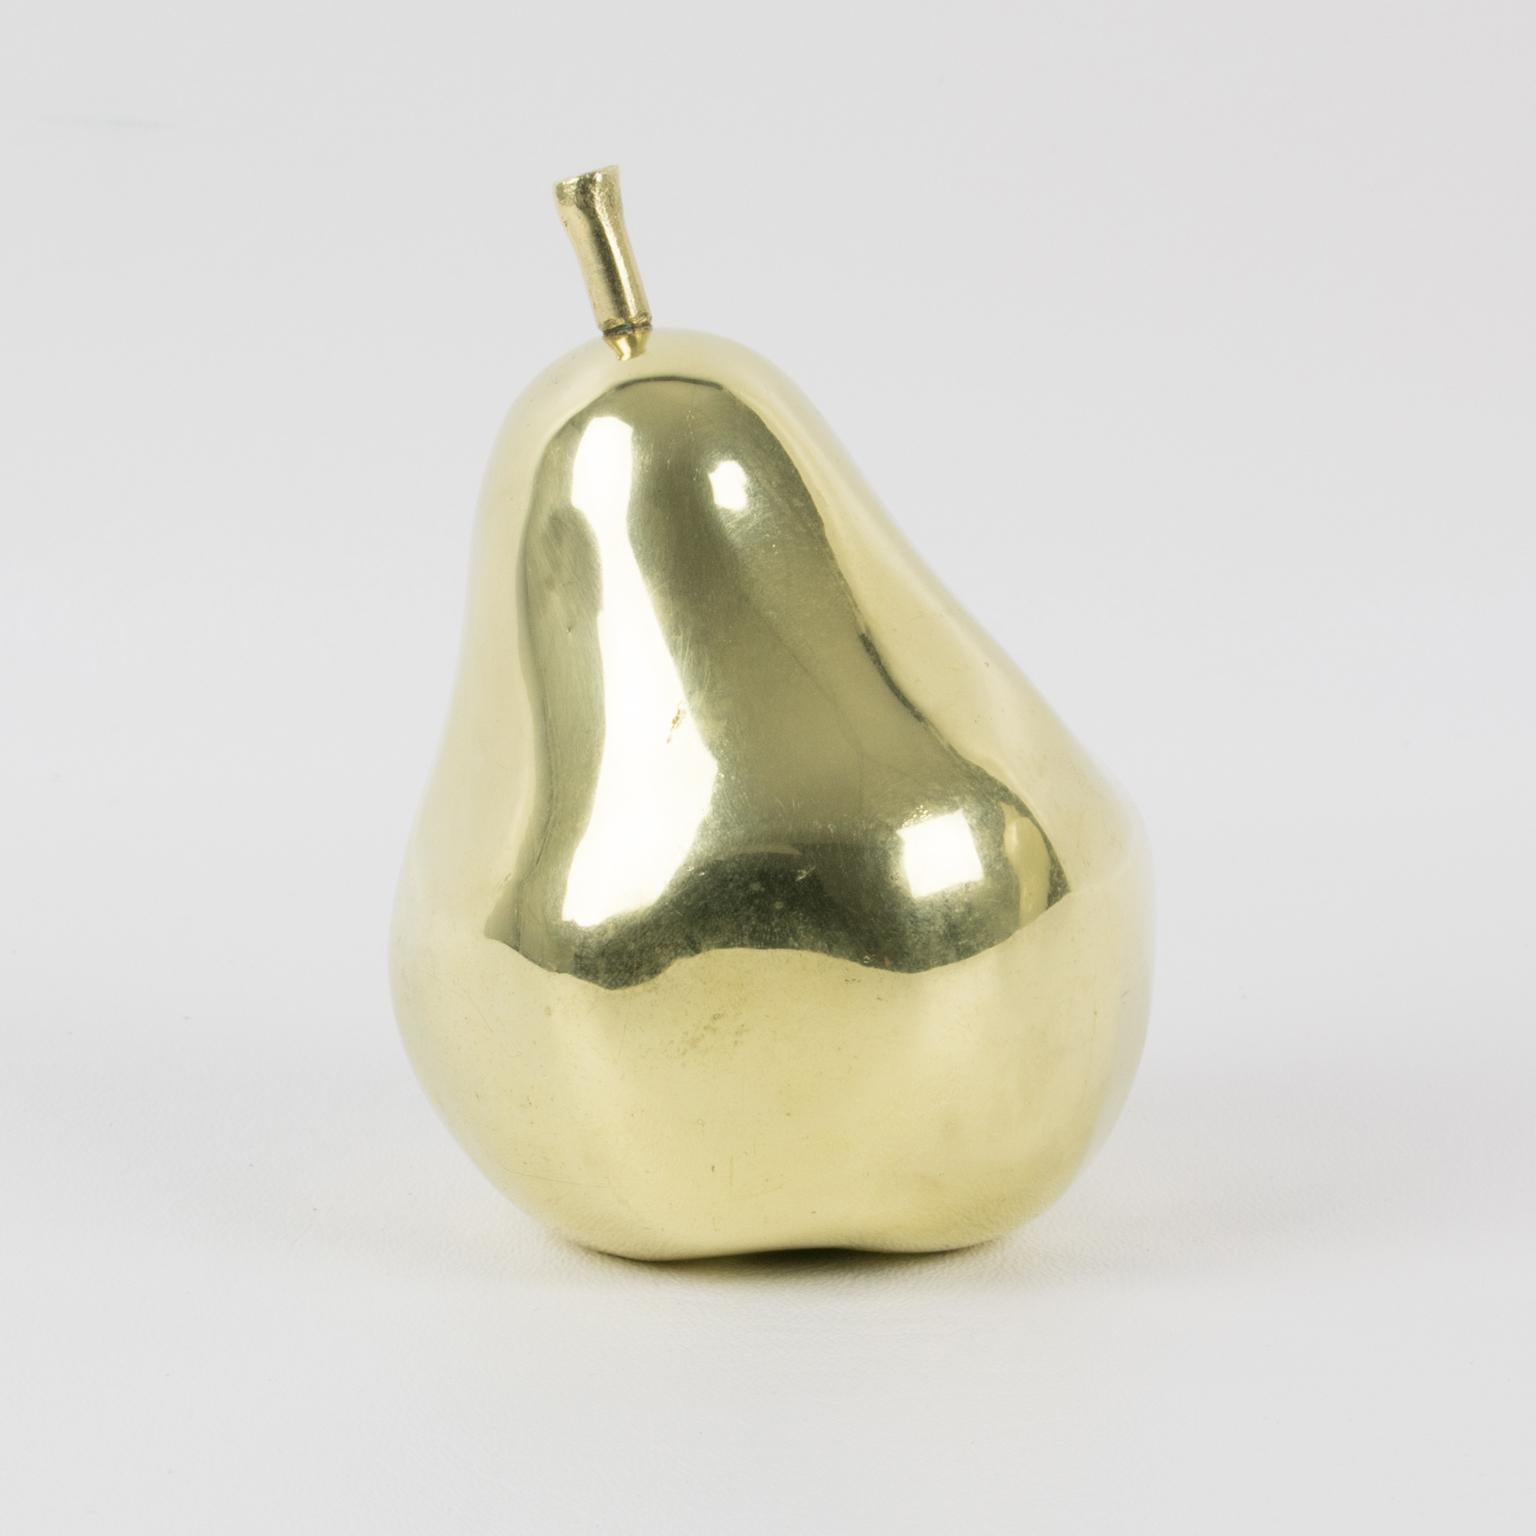 French Monique Gerber Life-size Gilded Bronze Pear Sculpture, France 1980s